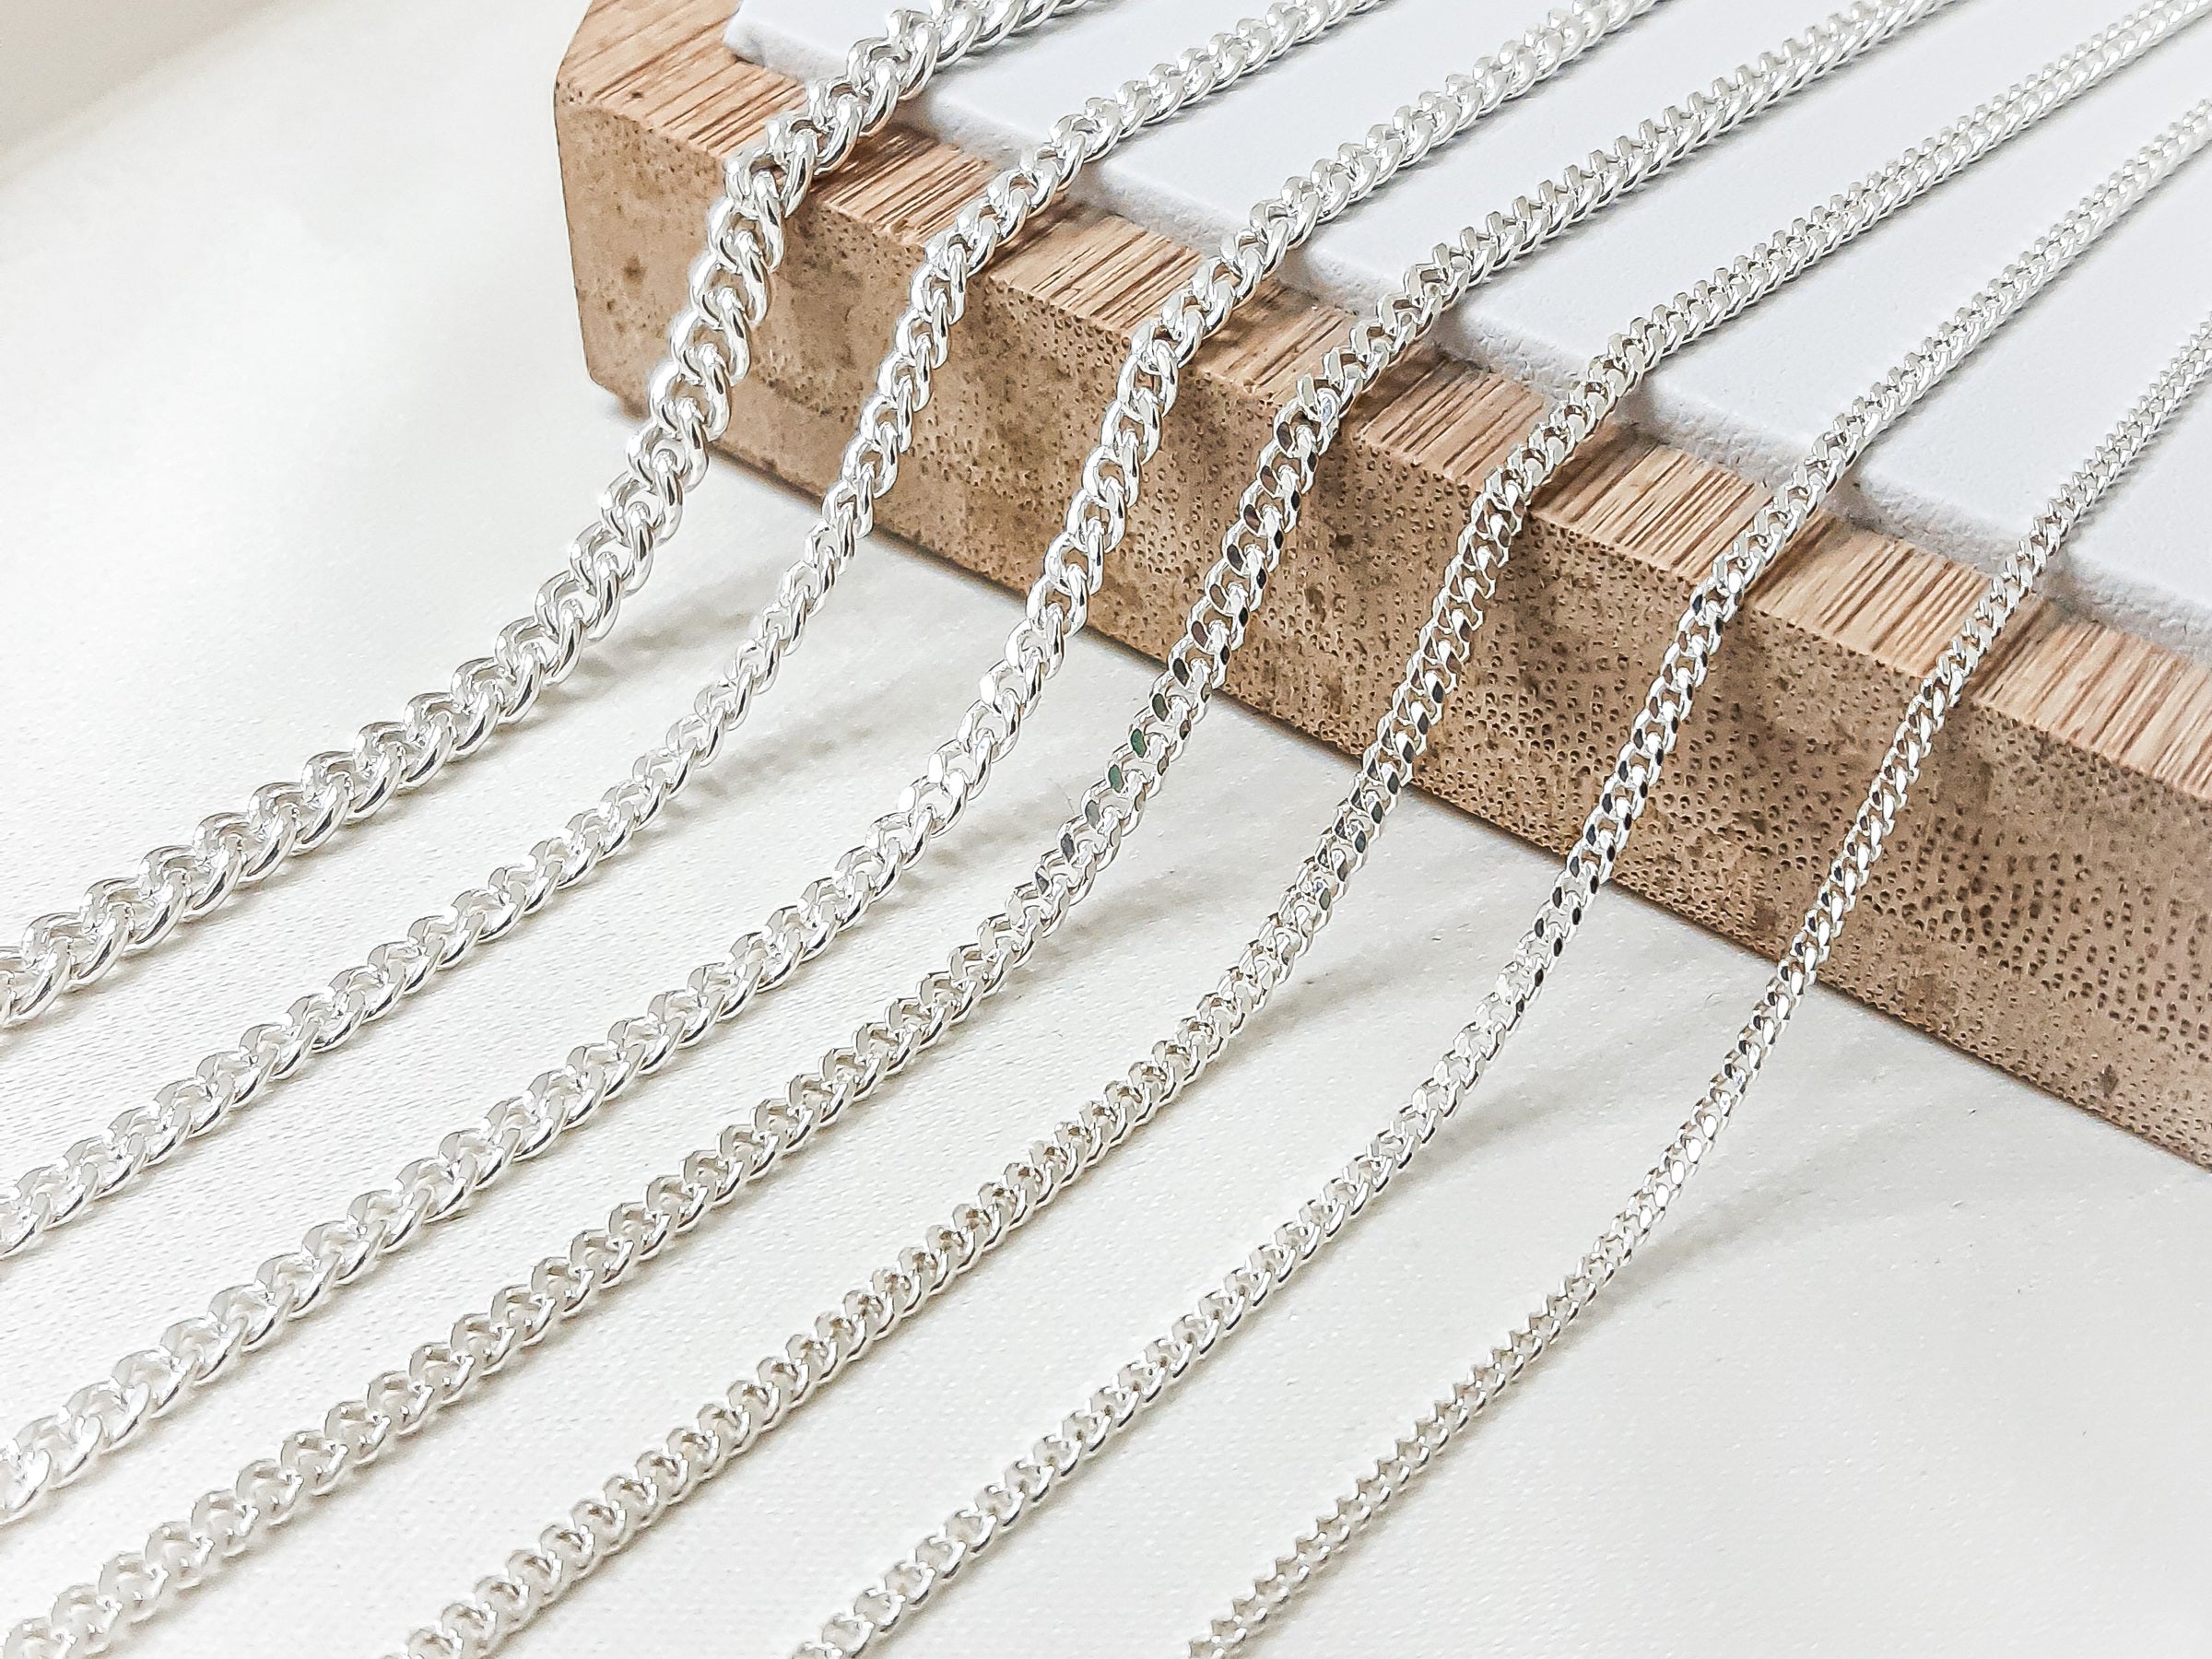 Curb Chain Necklace 990 Silver